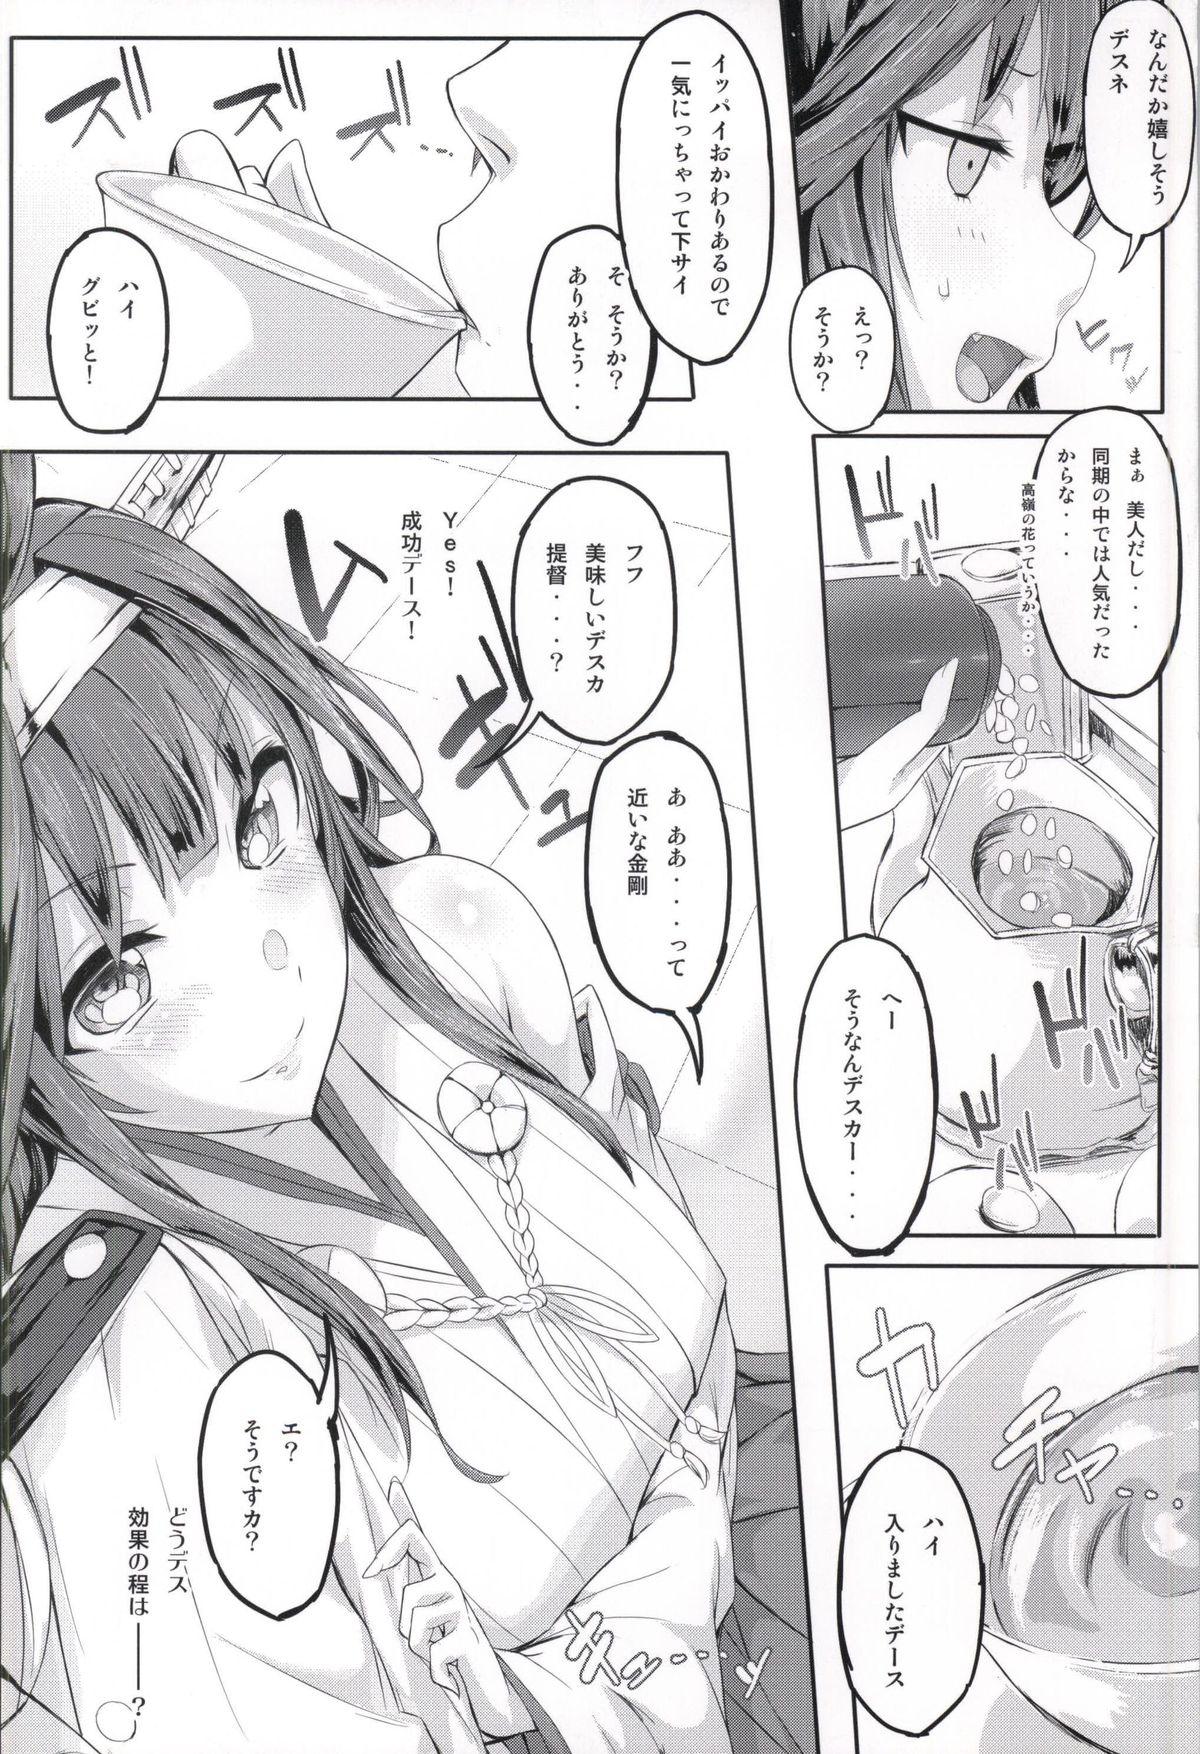 Eating Pussy Fleet Girls Pack Vol. 2 - Kantai collection Butthole - Page 5